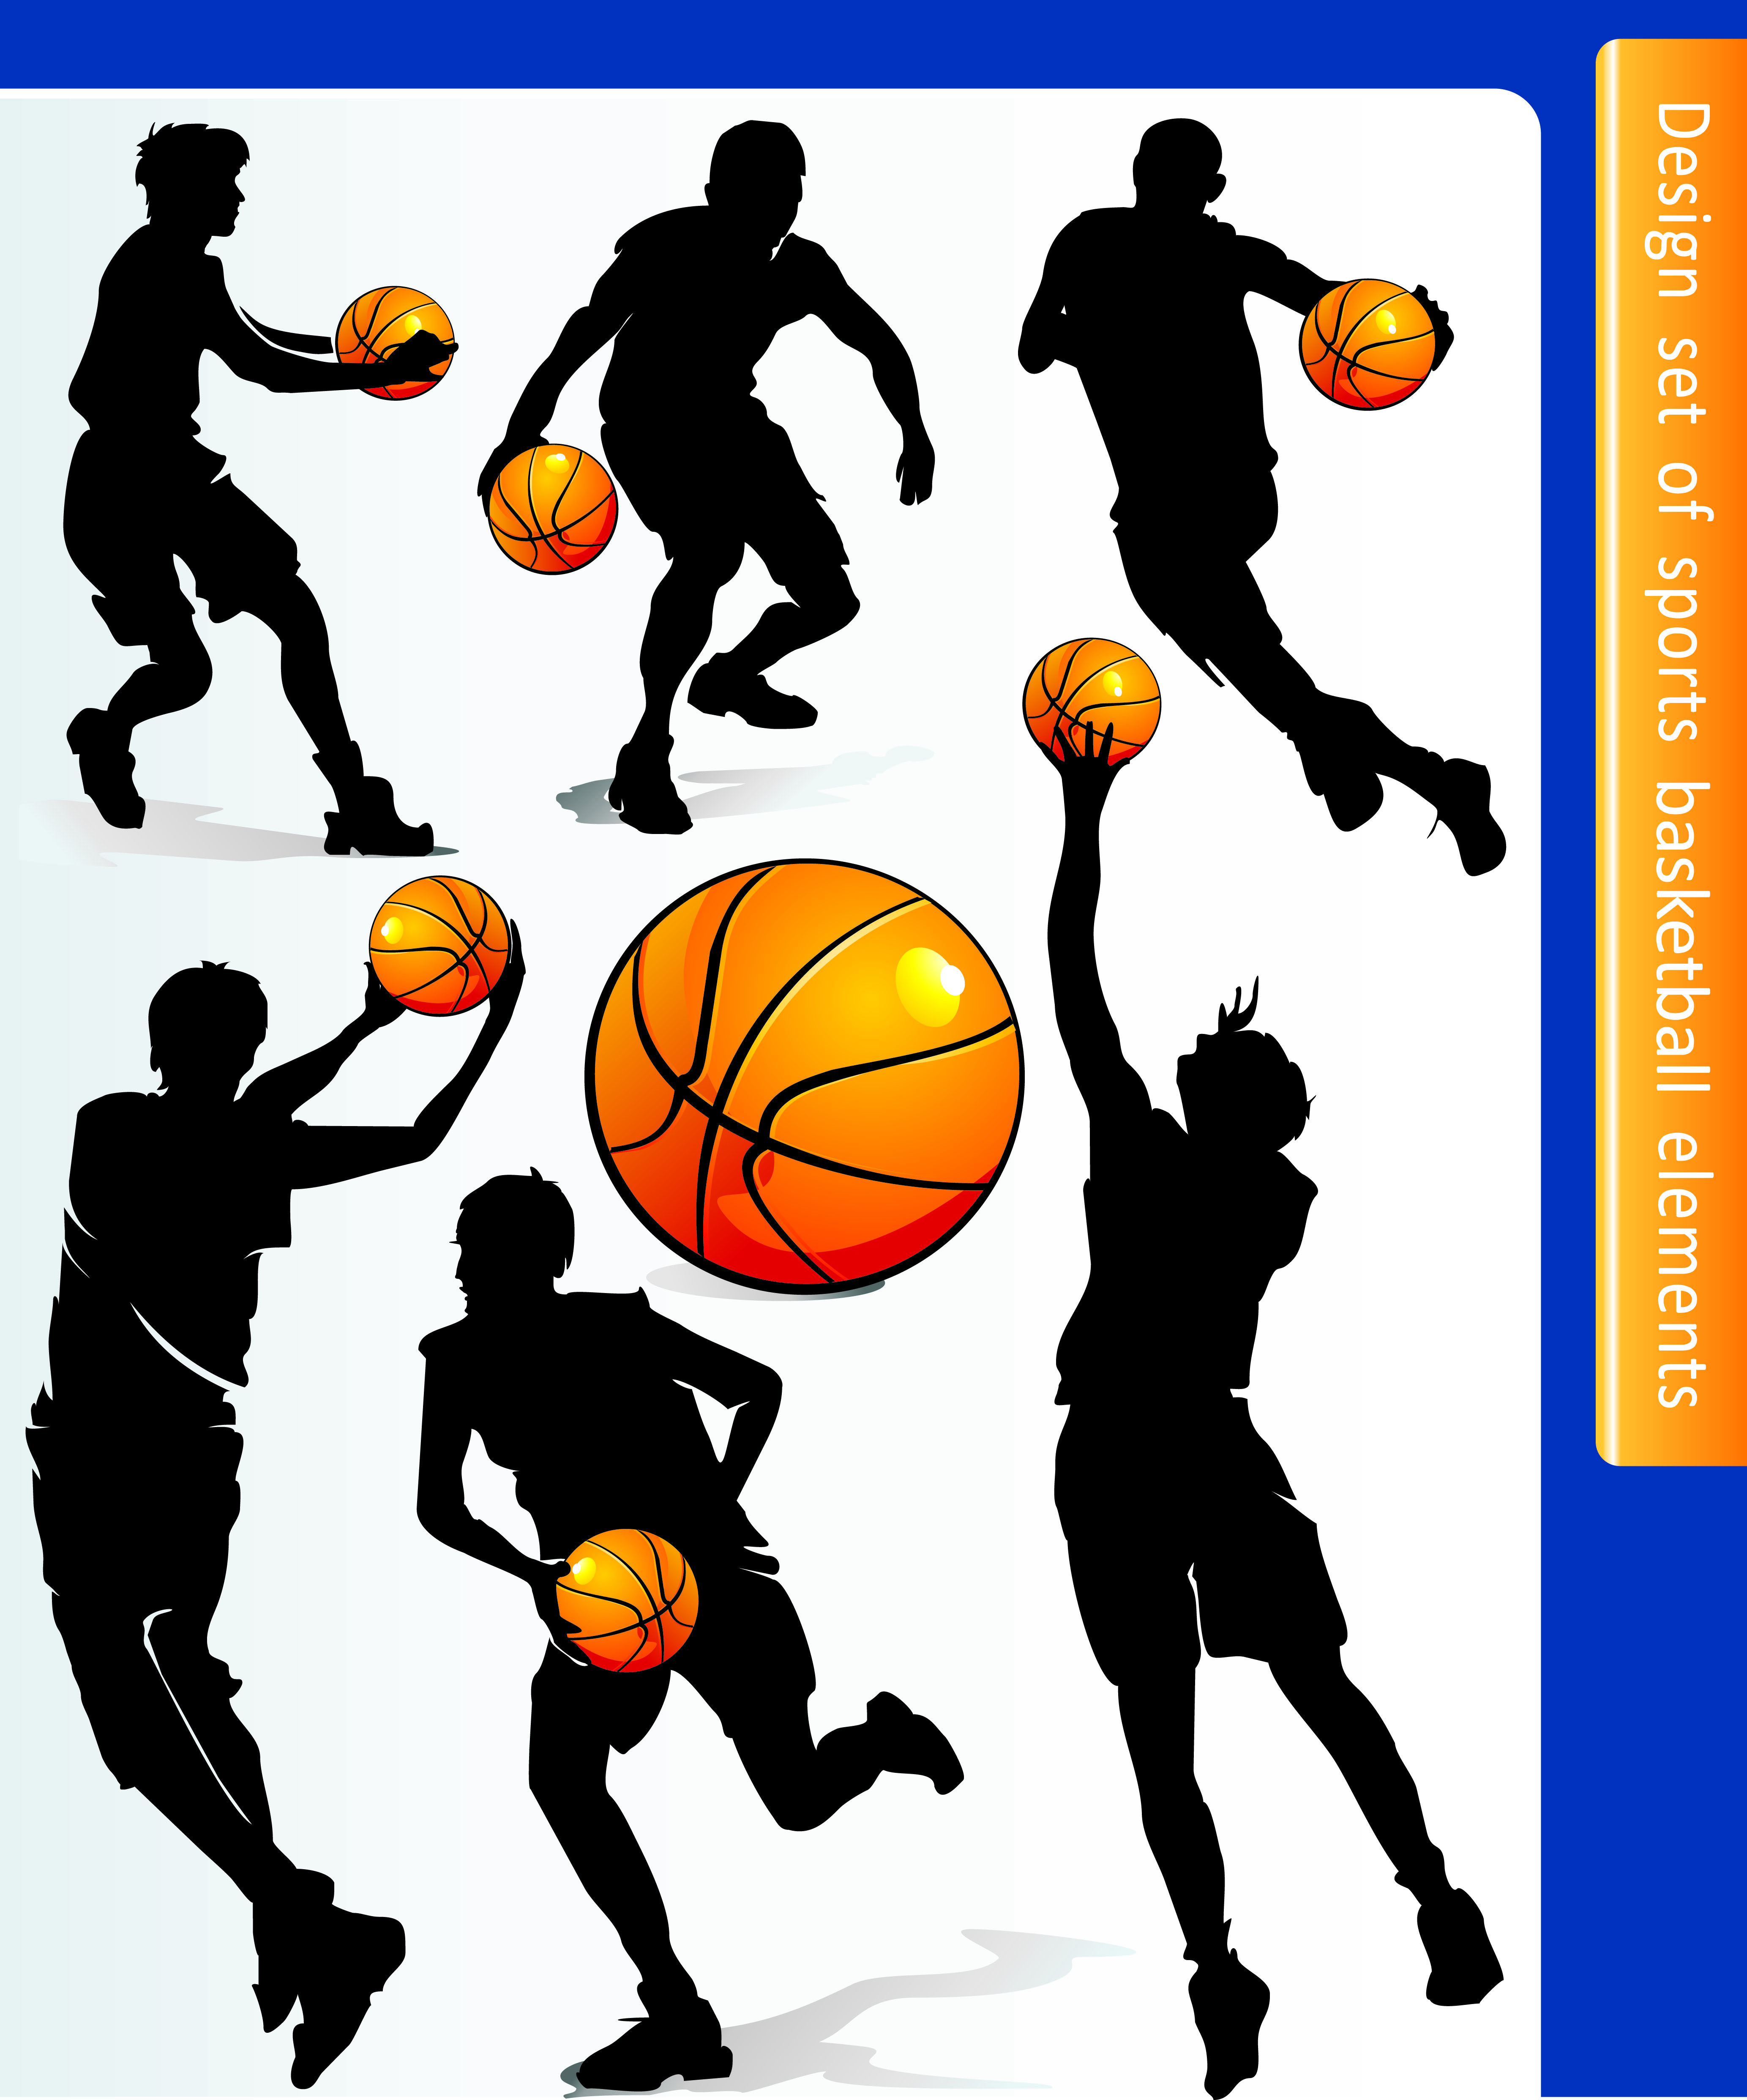 Basketball silhouette character vector Free Vector 